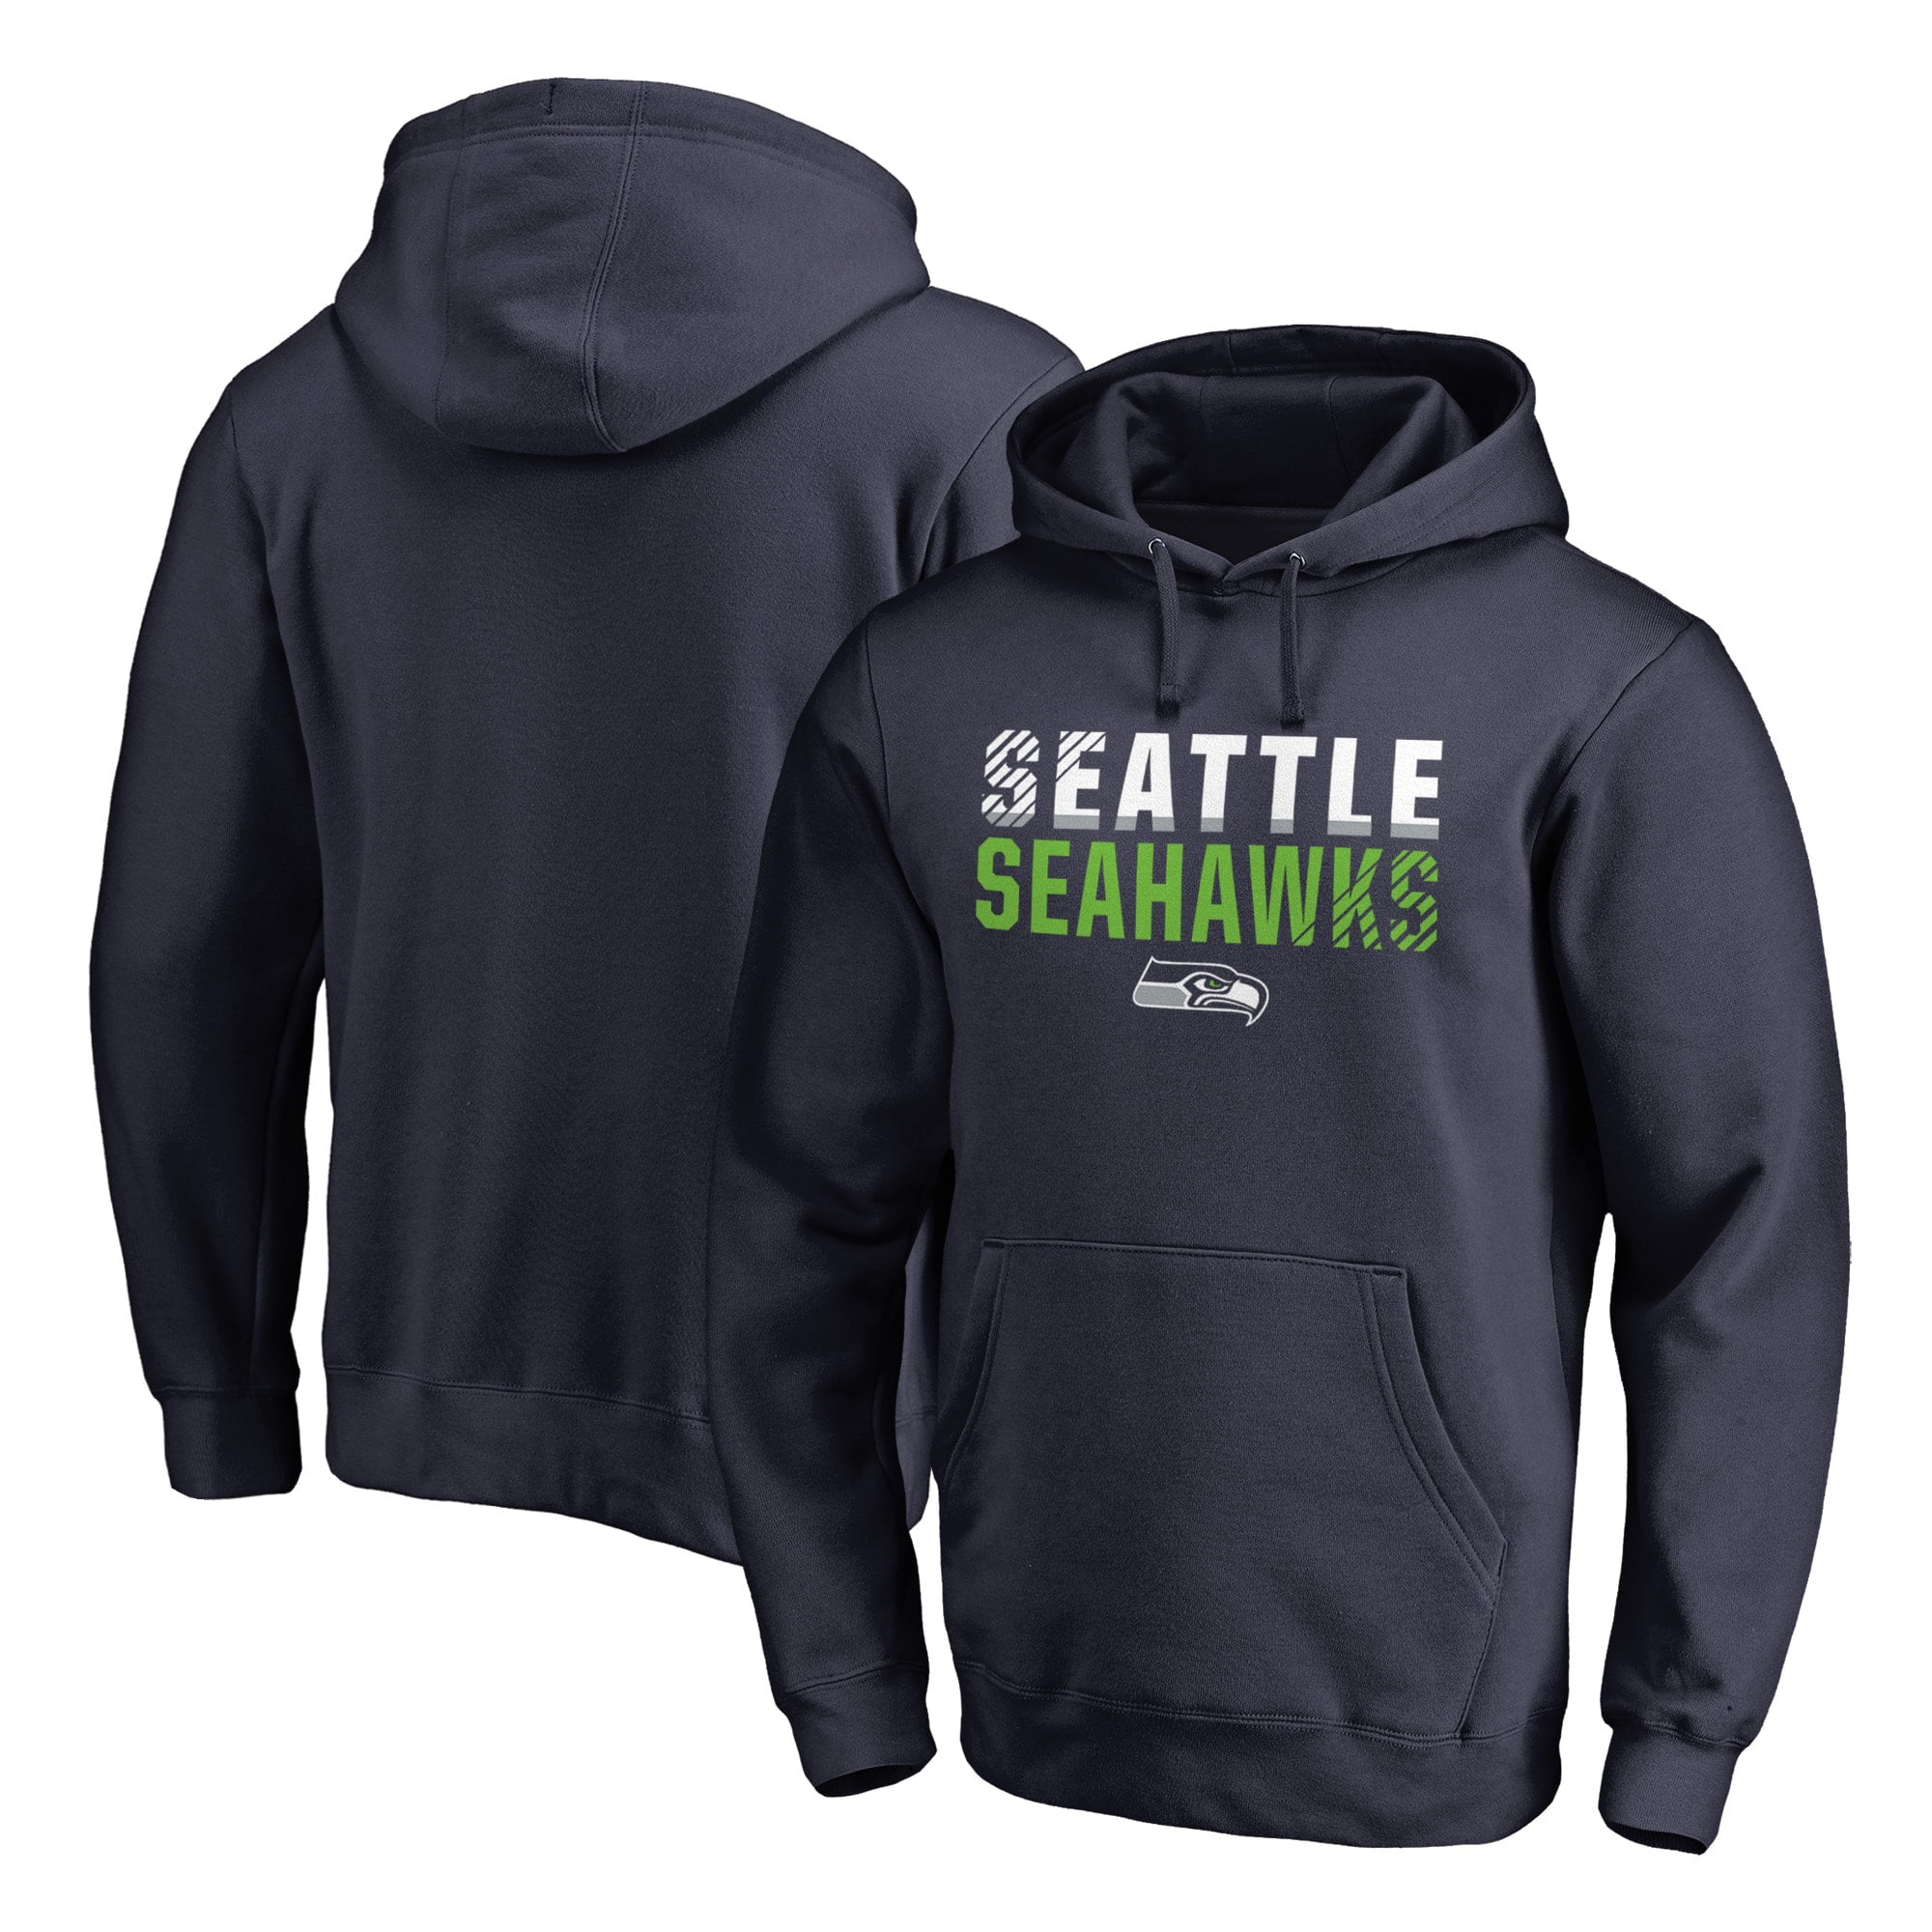 Men's NFL Pro Line by Fanatics Branded College Navy Seattle Seahawks Iconic Collection Fade Out Pullover Hoodie